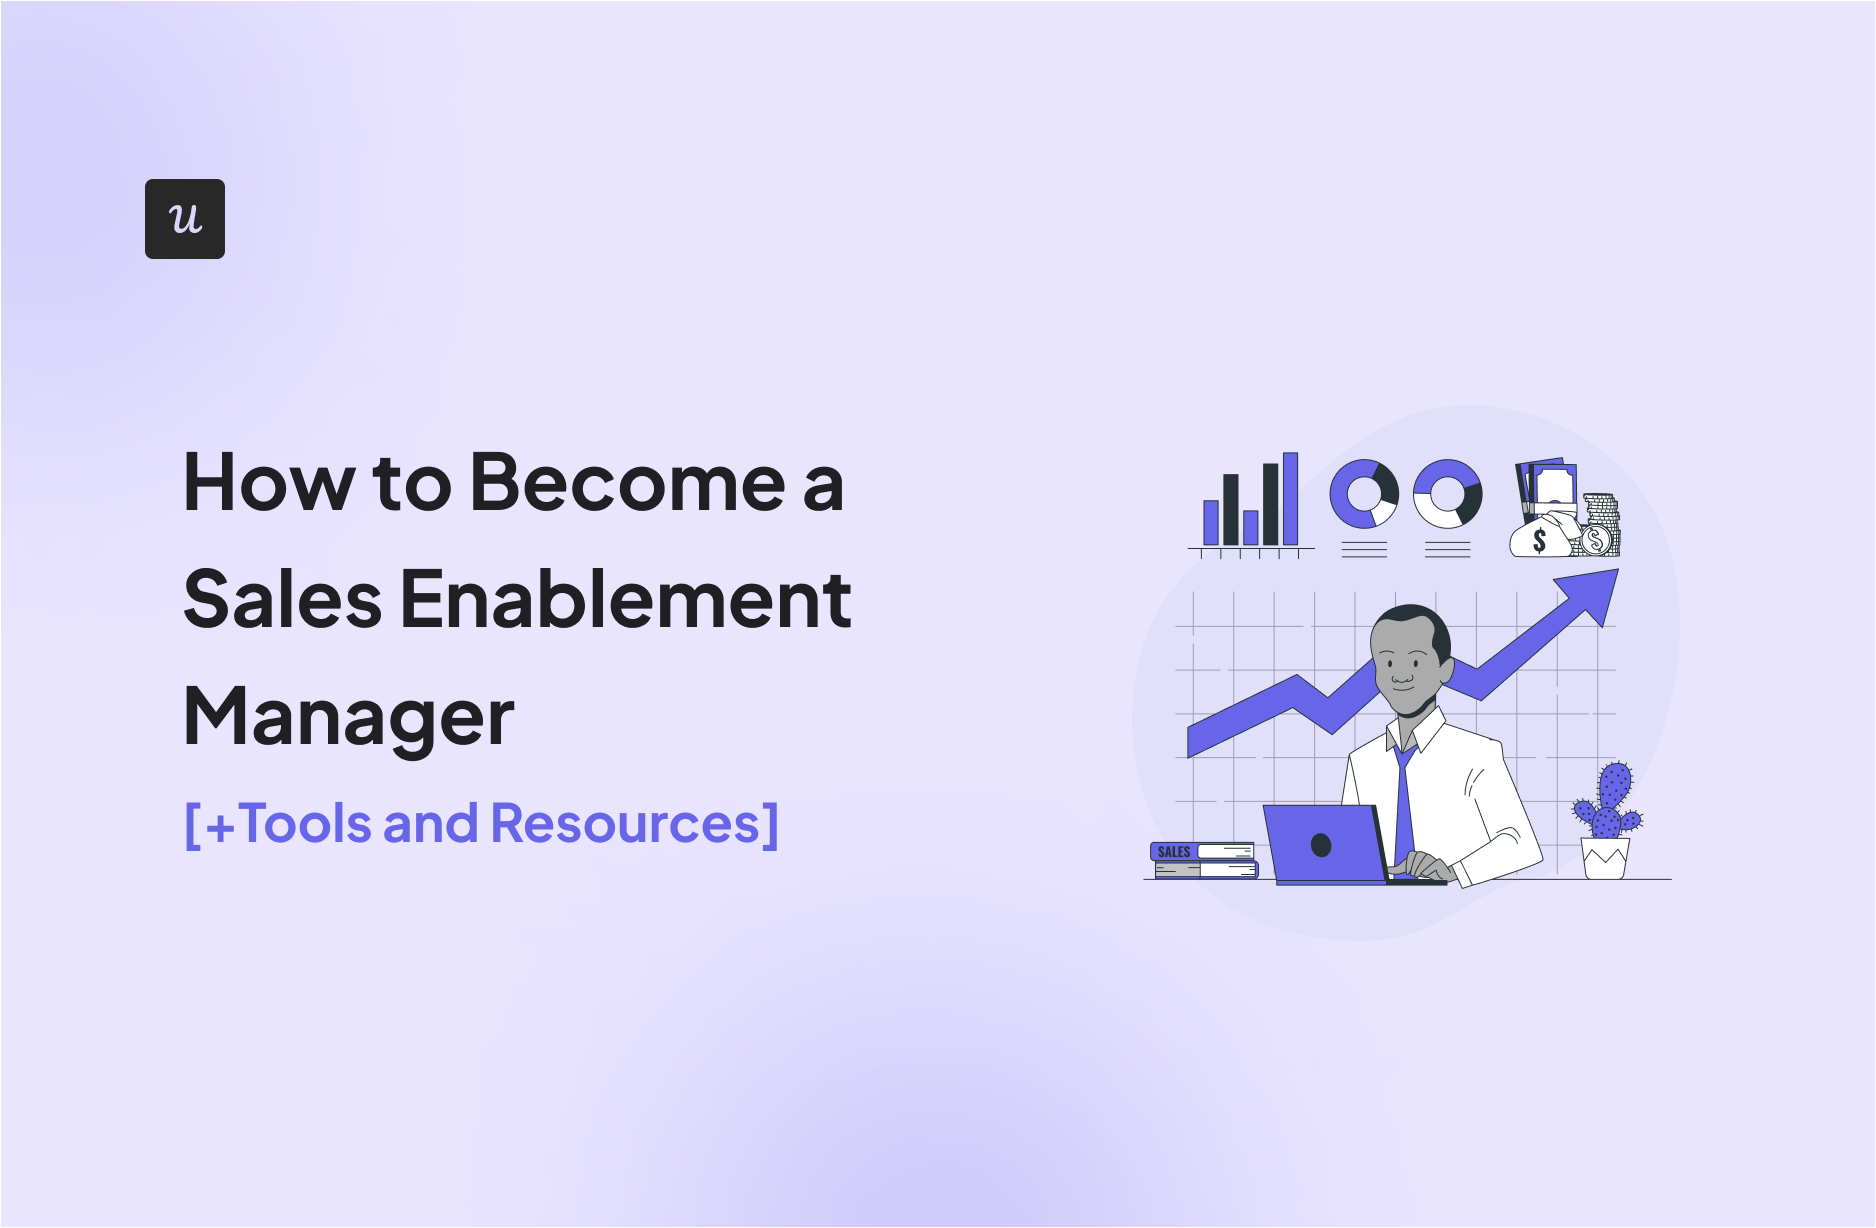 How to Become a Sales Enablement Manager [+Tools and Resources]